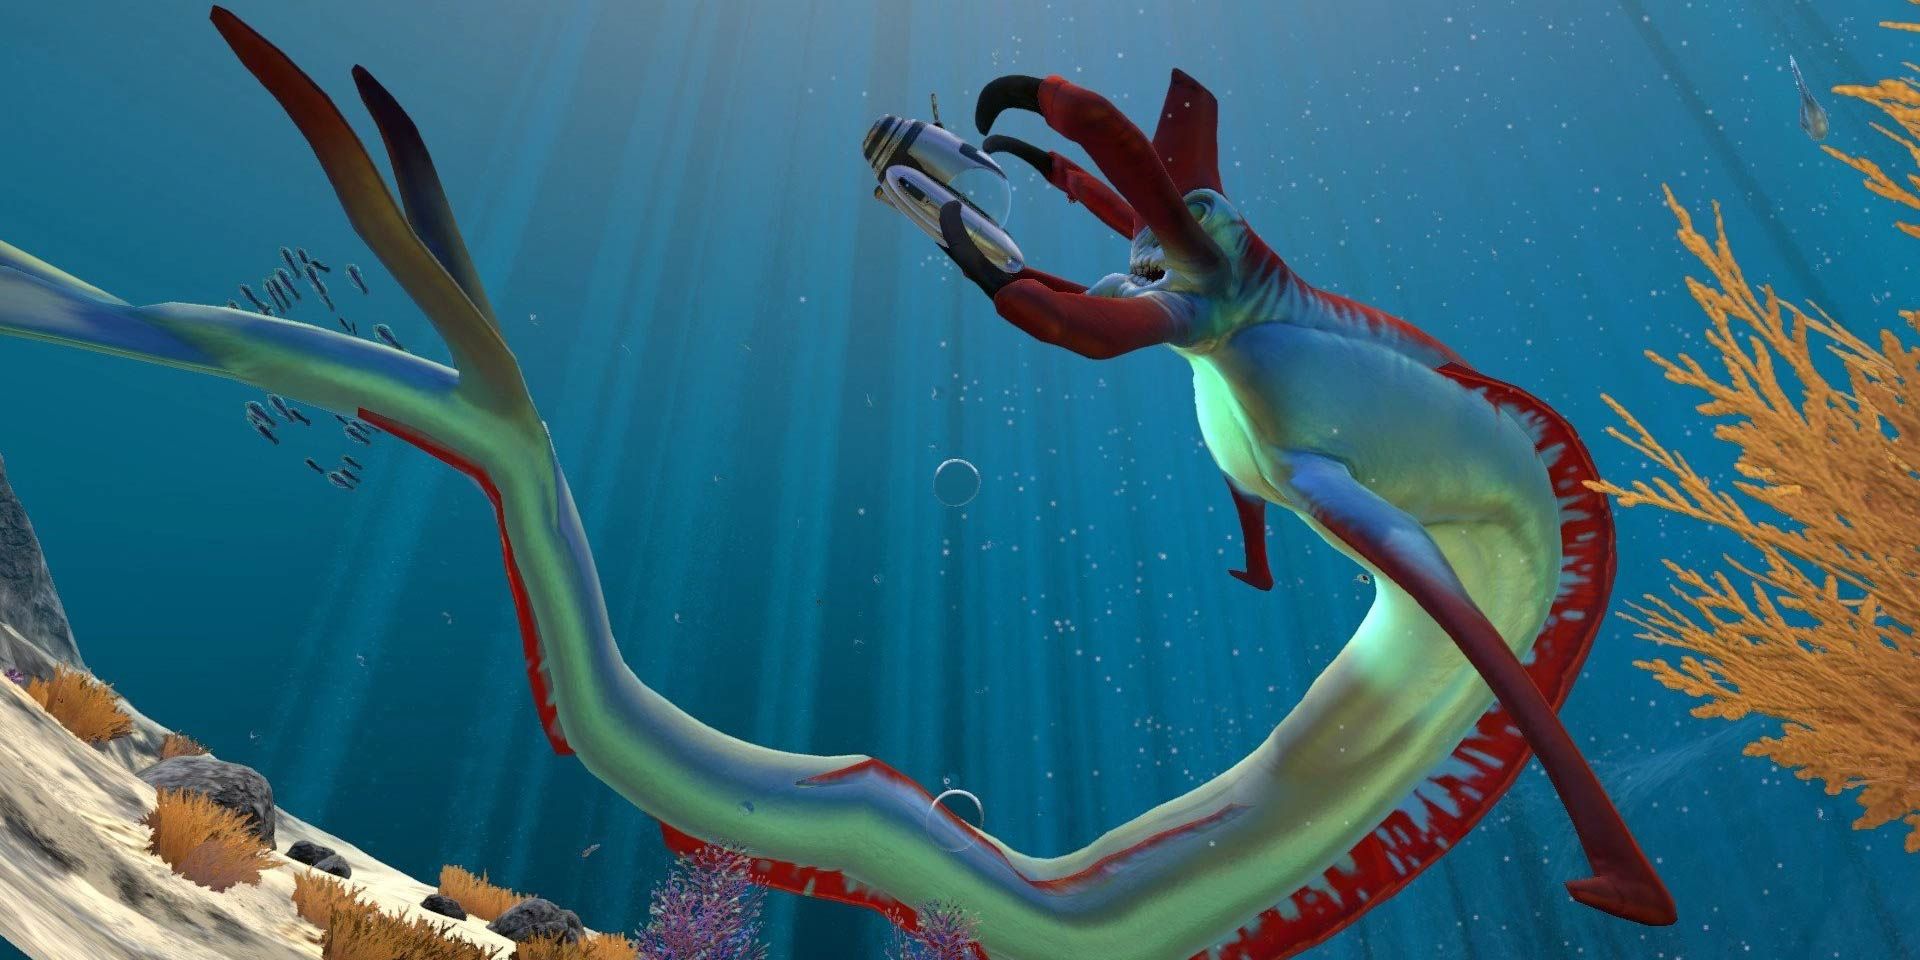 A Reaper leviathan closing in on a Seamoth in Subnautica.